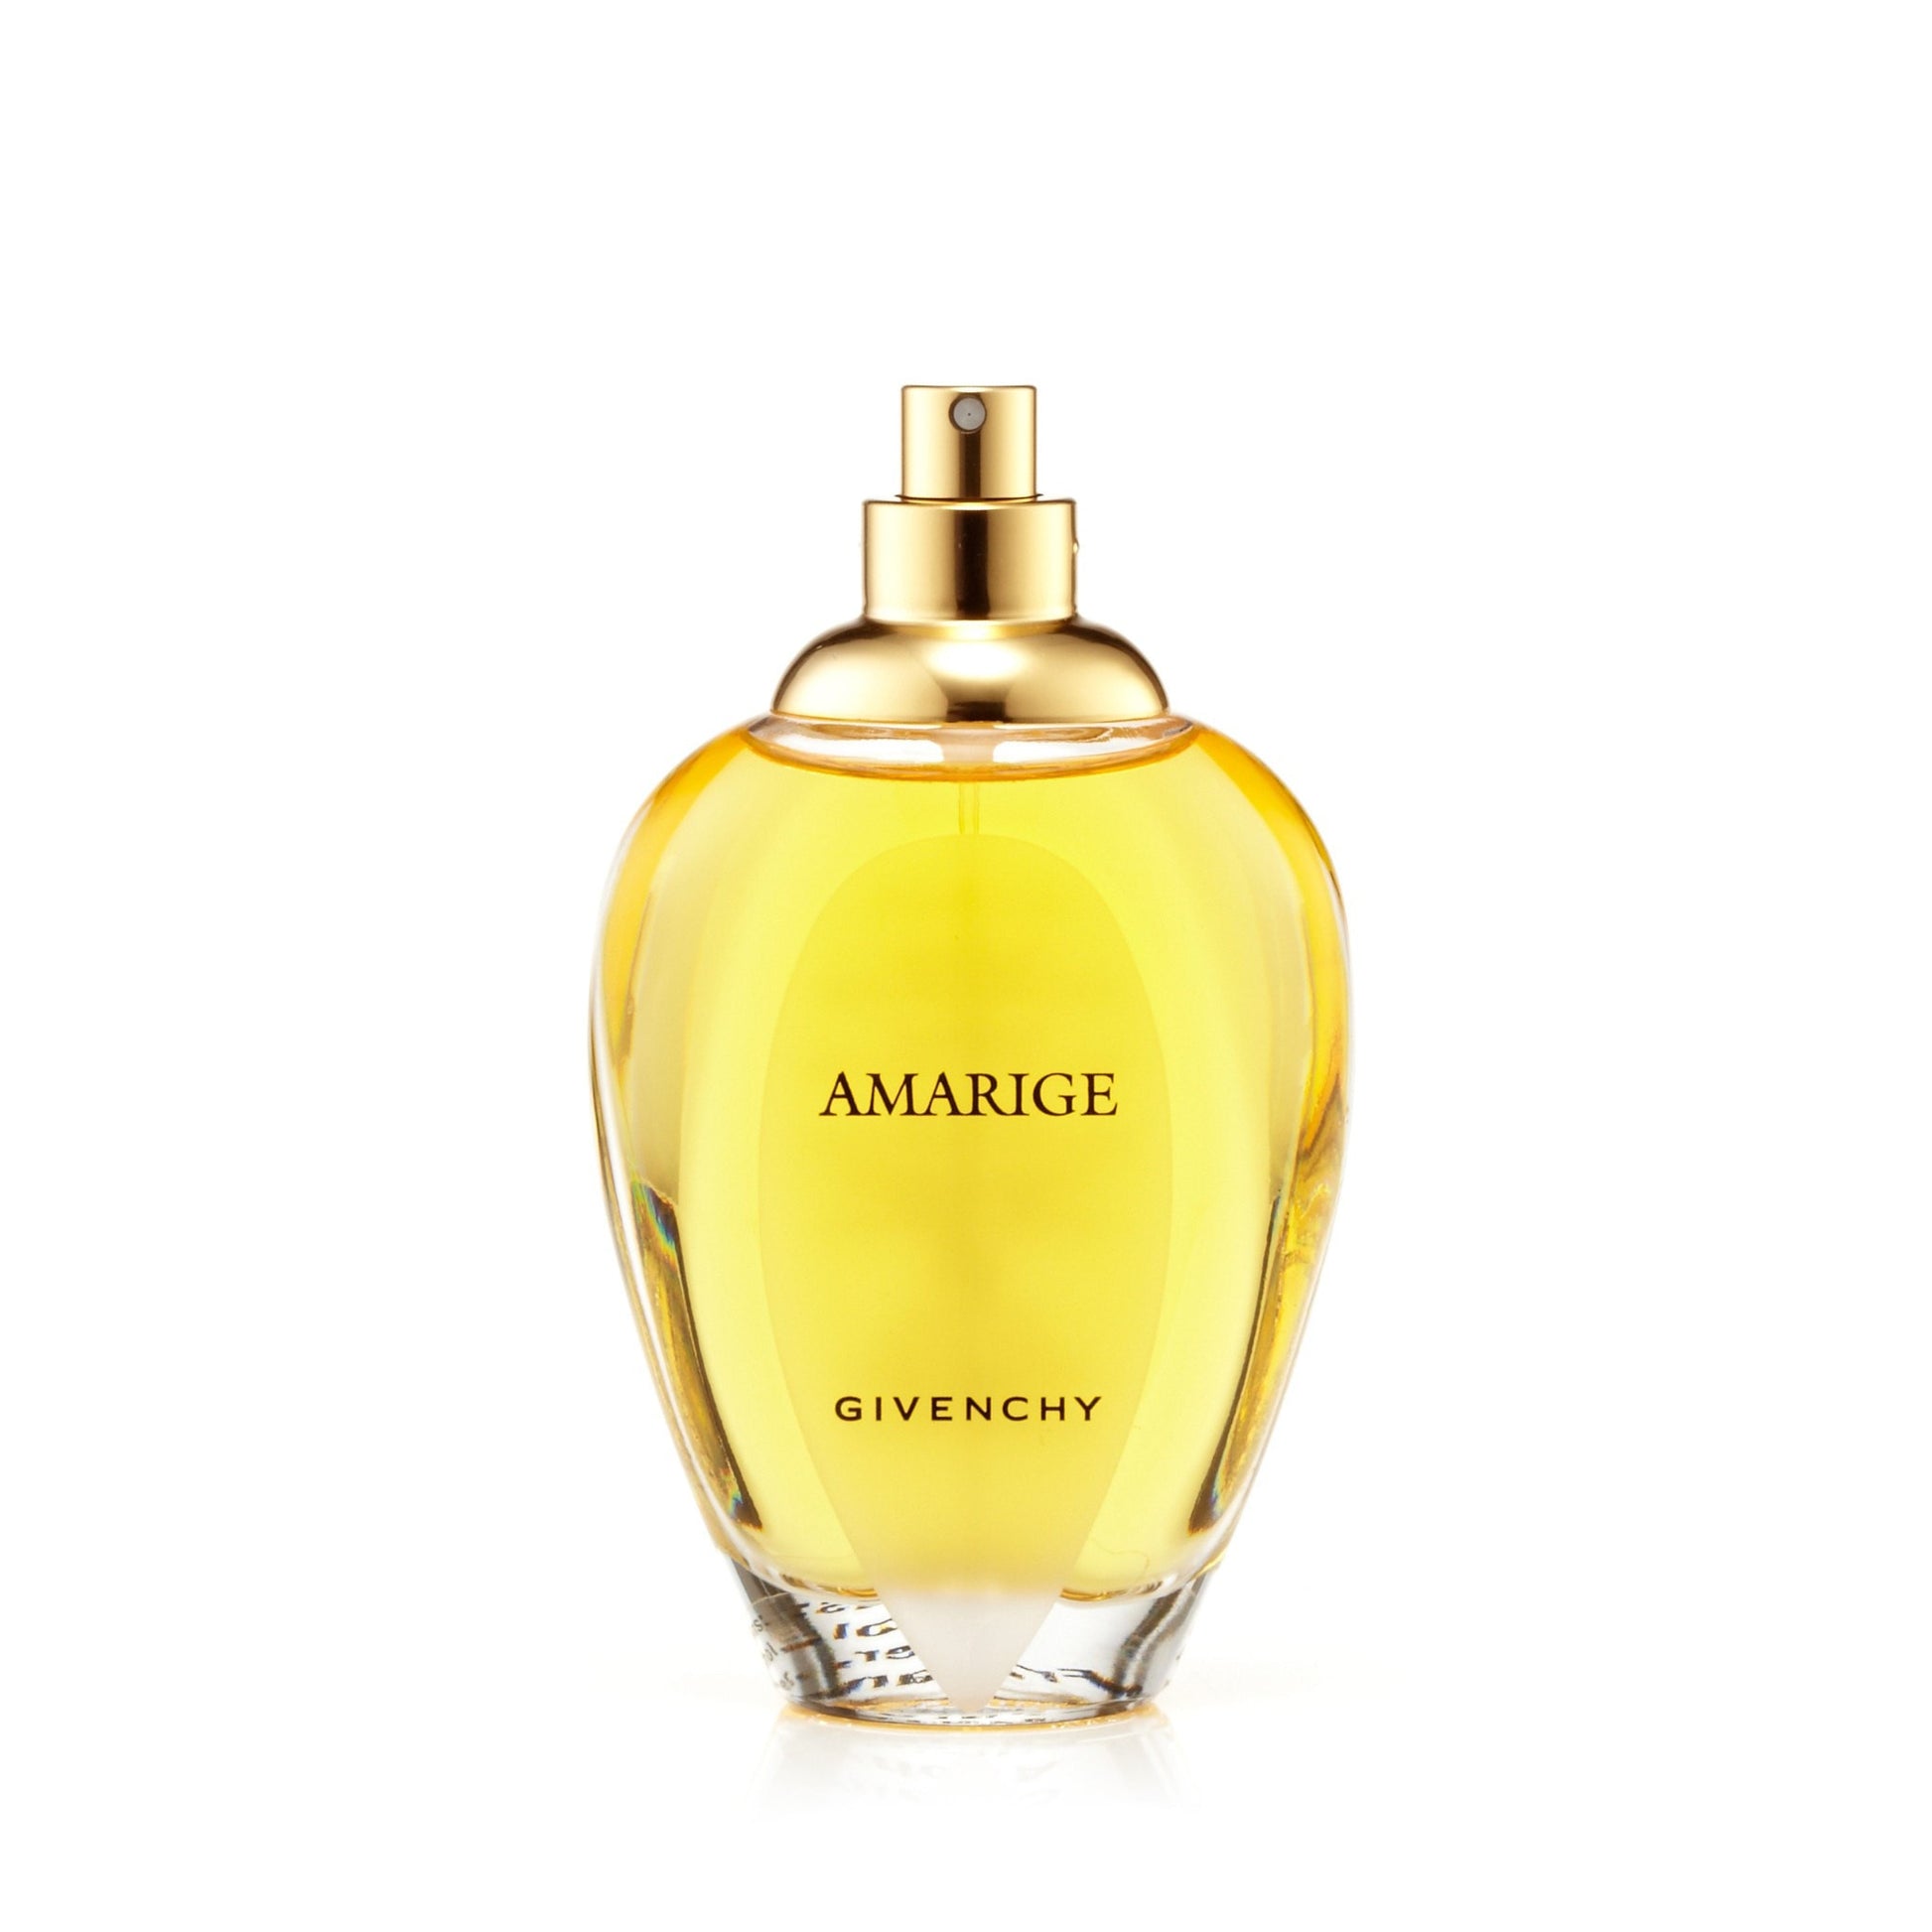 Amarige Eau de Toilette Spray for Women by Givenchy 3.4 oz. Tester Click to open in modal